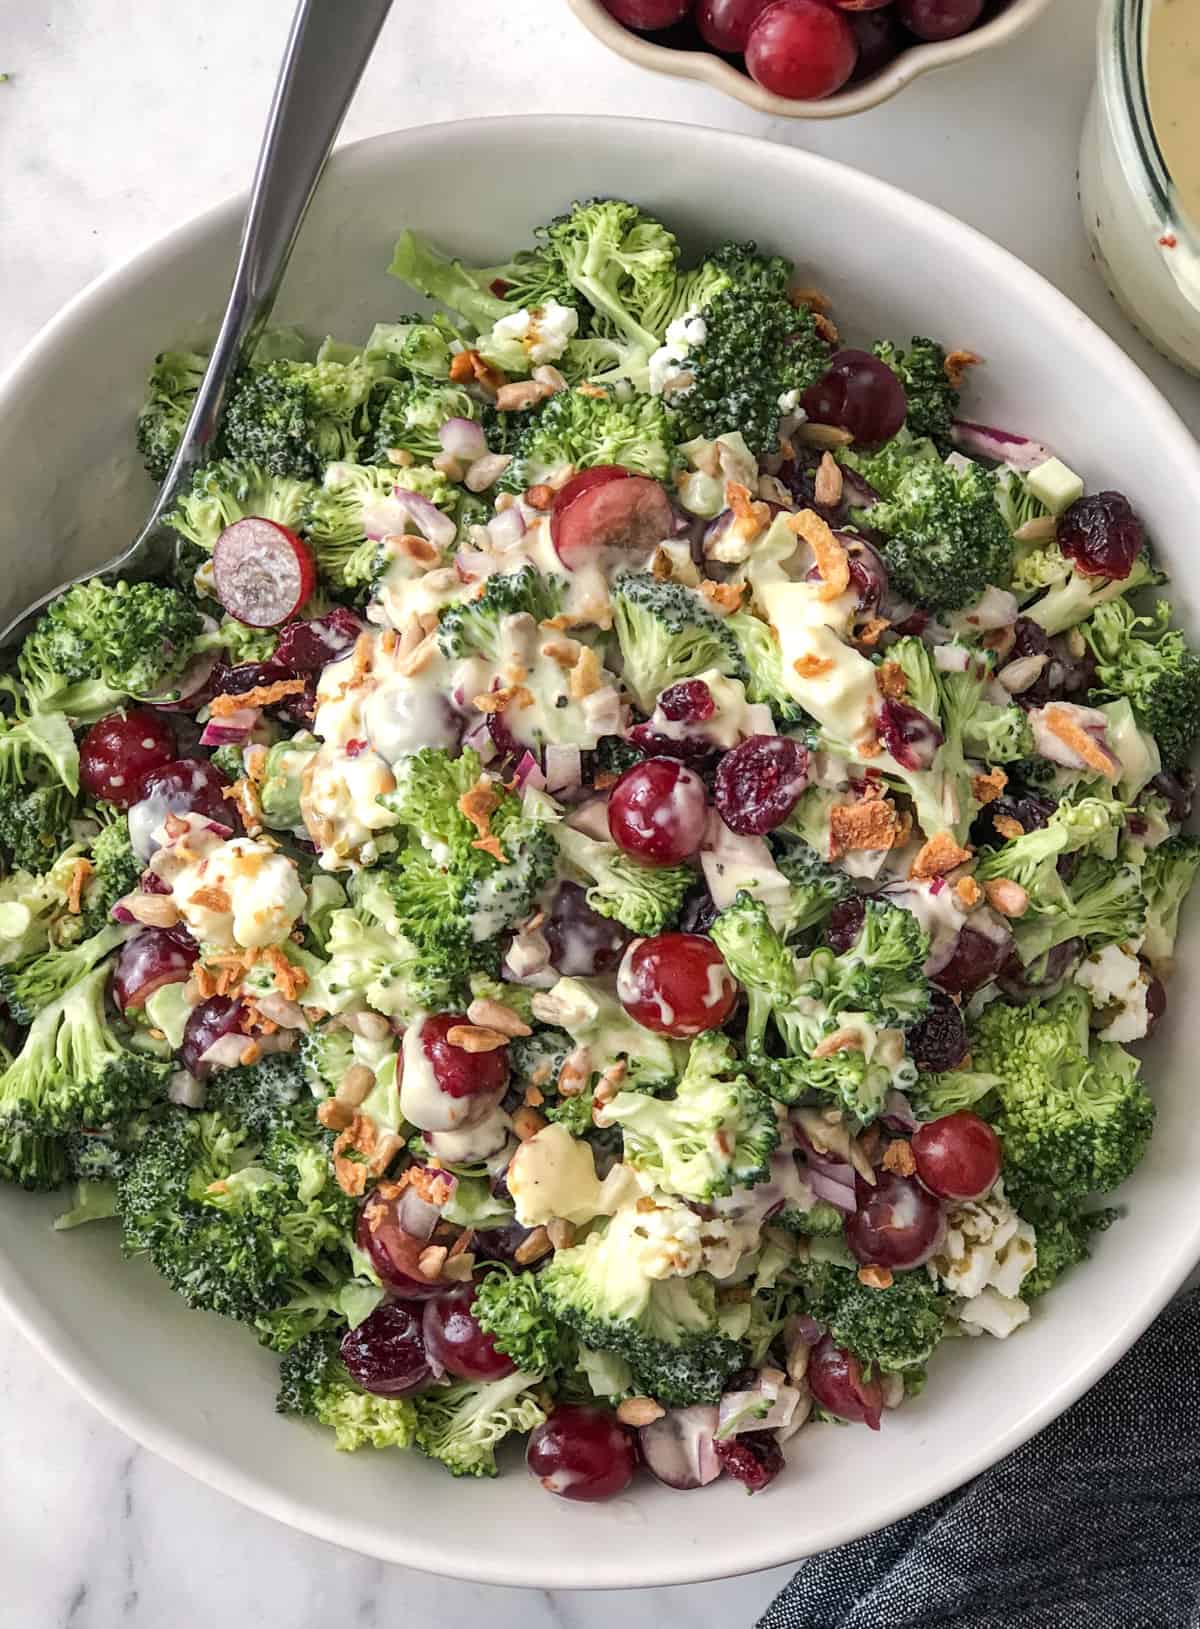 Bowlful of broccoli salad with grapes sunflower seeds and cranberries.